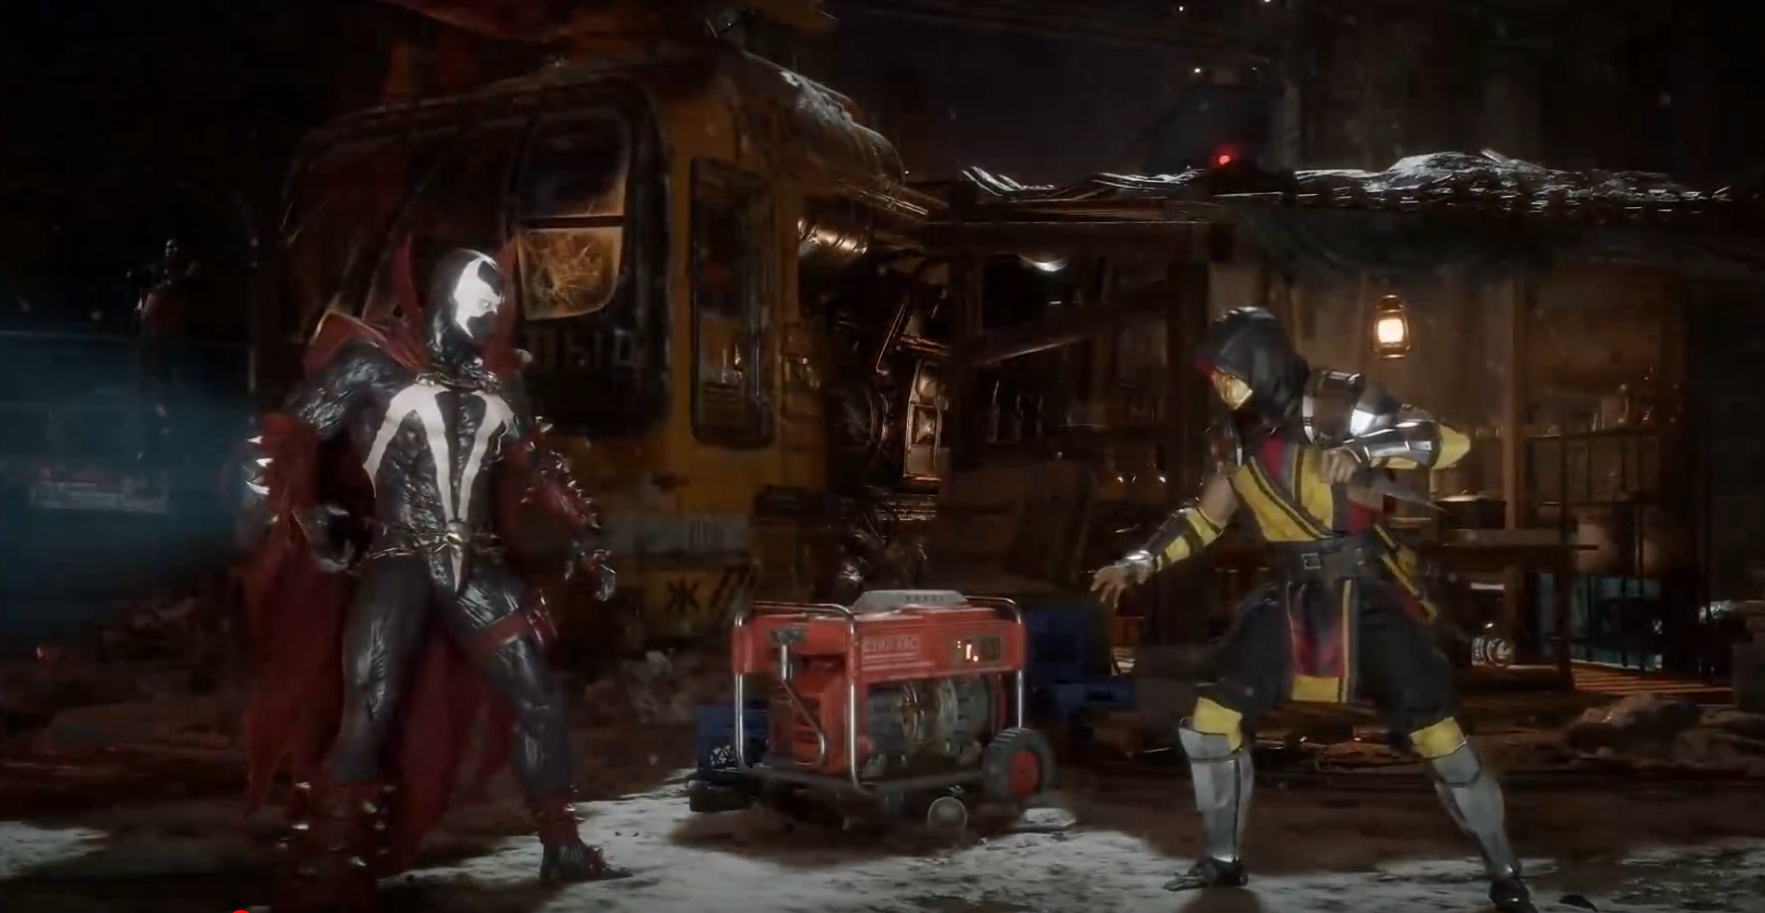 The New DLC Character Spawn In Mortal Kombat 11 Looks Immaculate Based On Recent Gameplay Footage